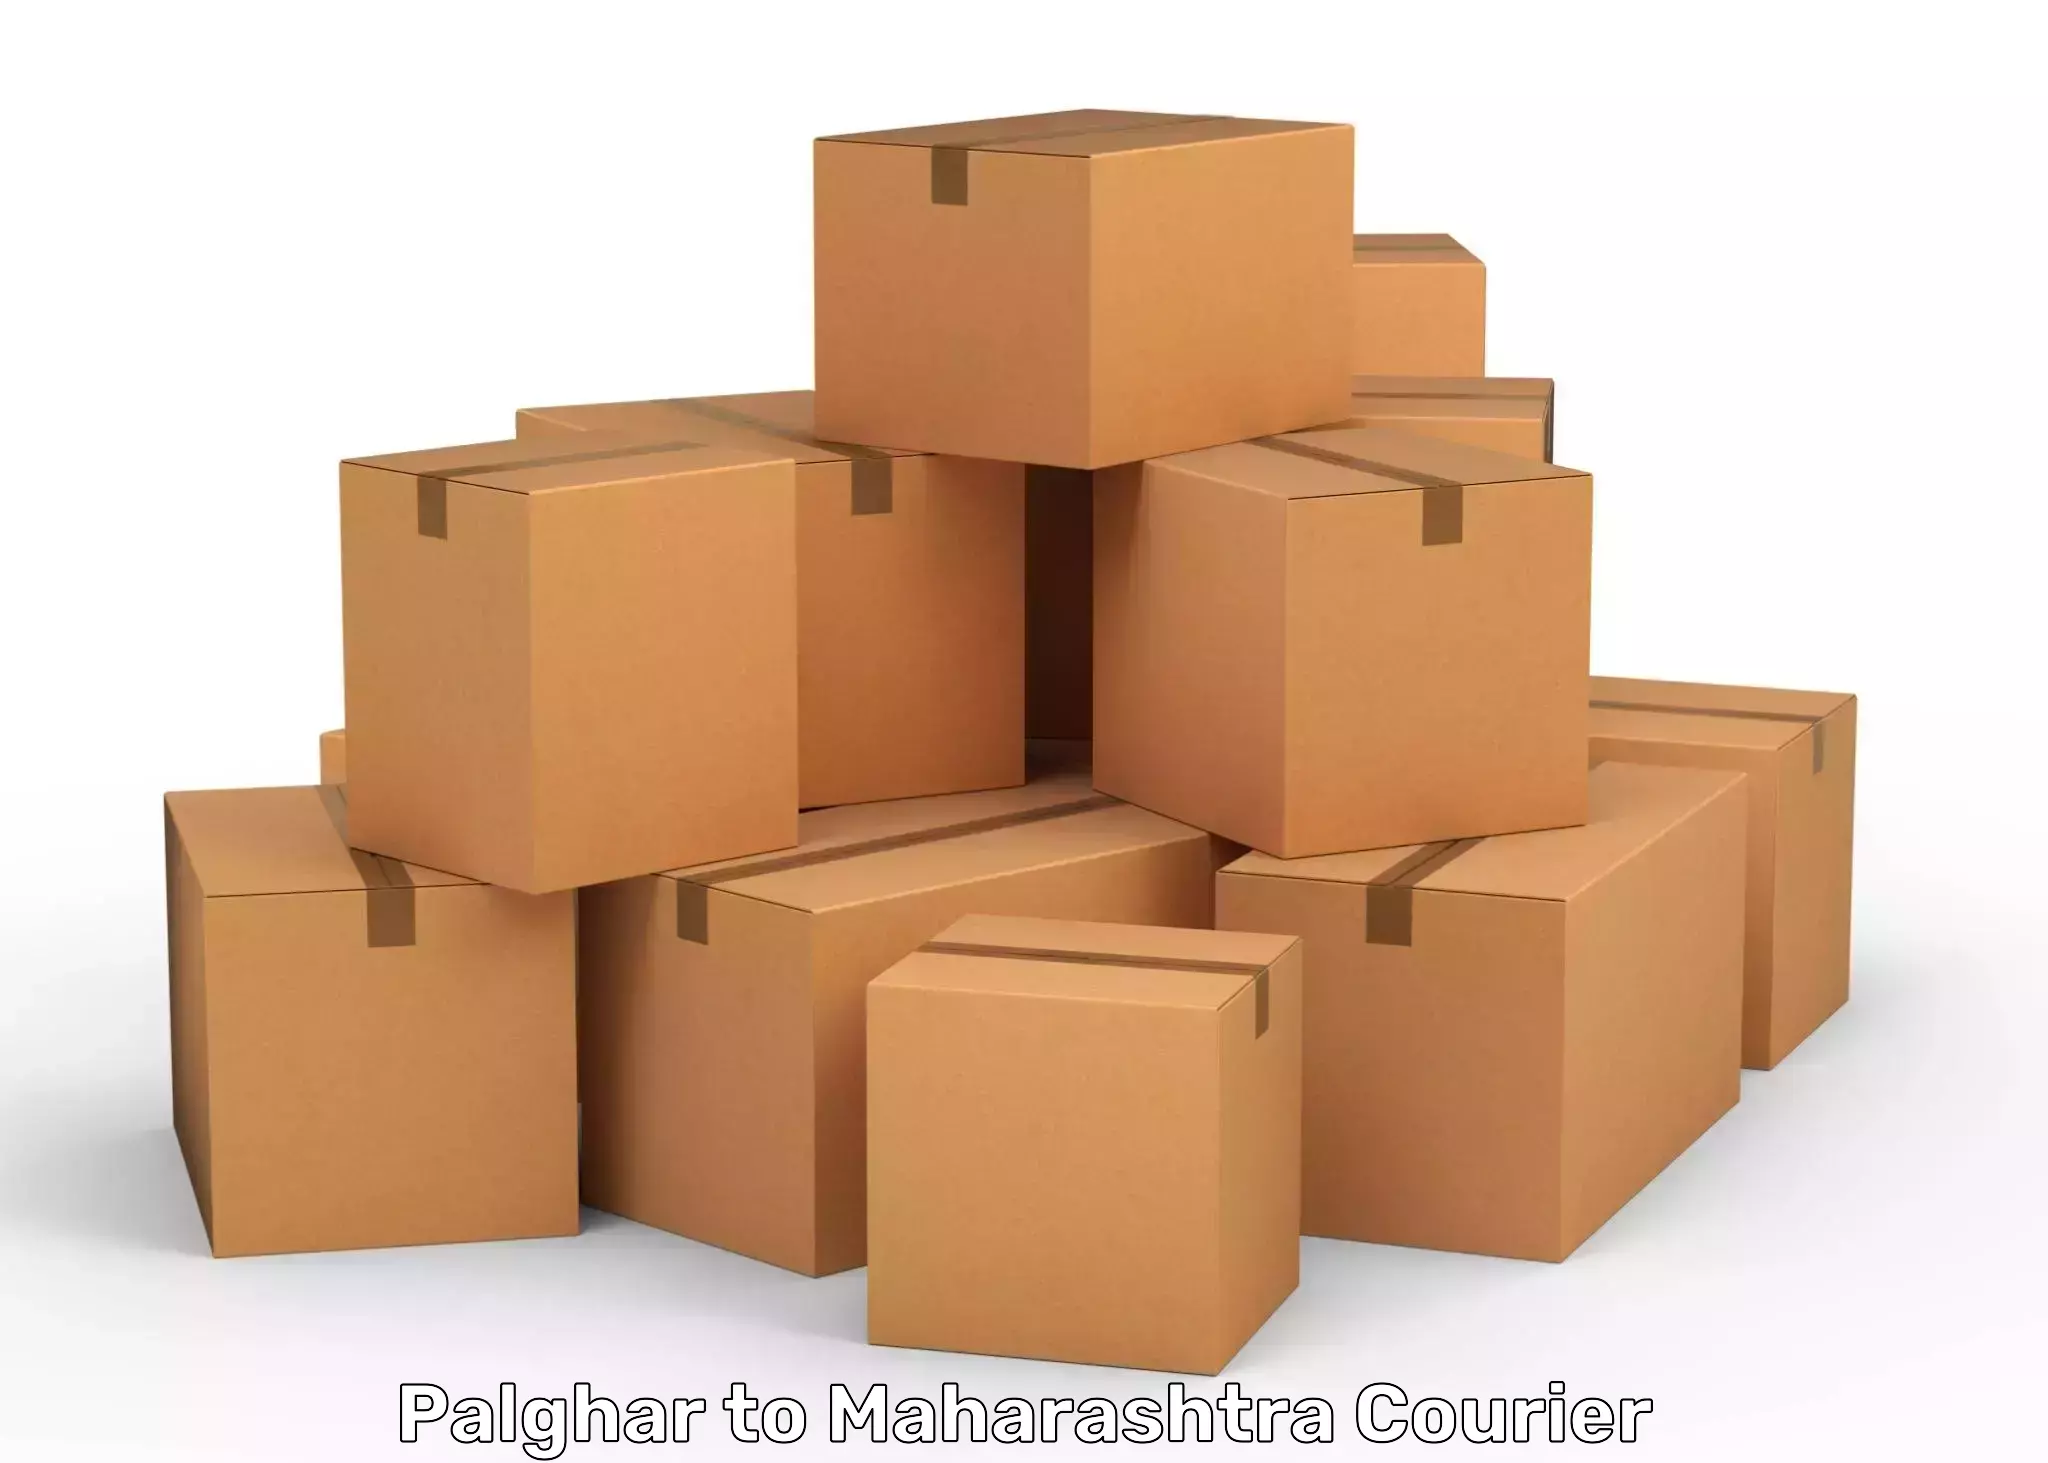 Nationwide shipping coverage Palghar to Chandrapur